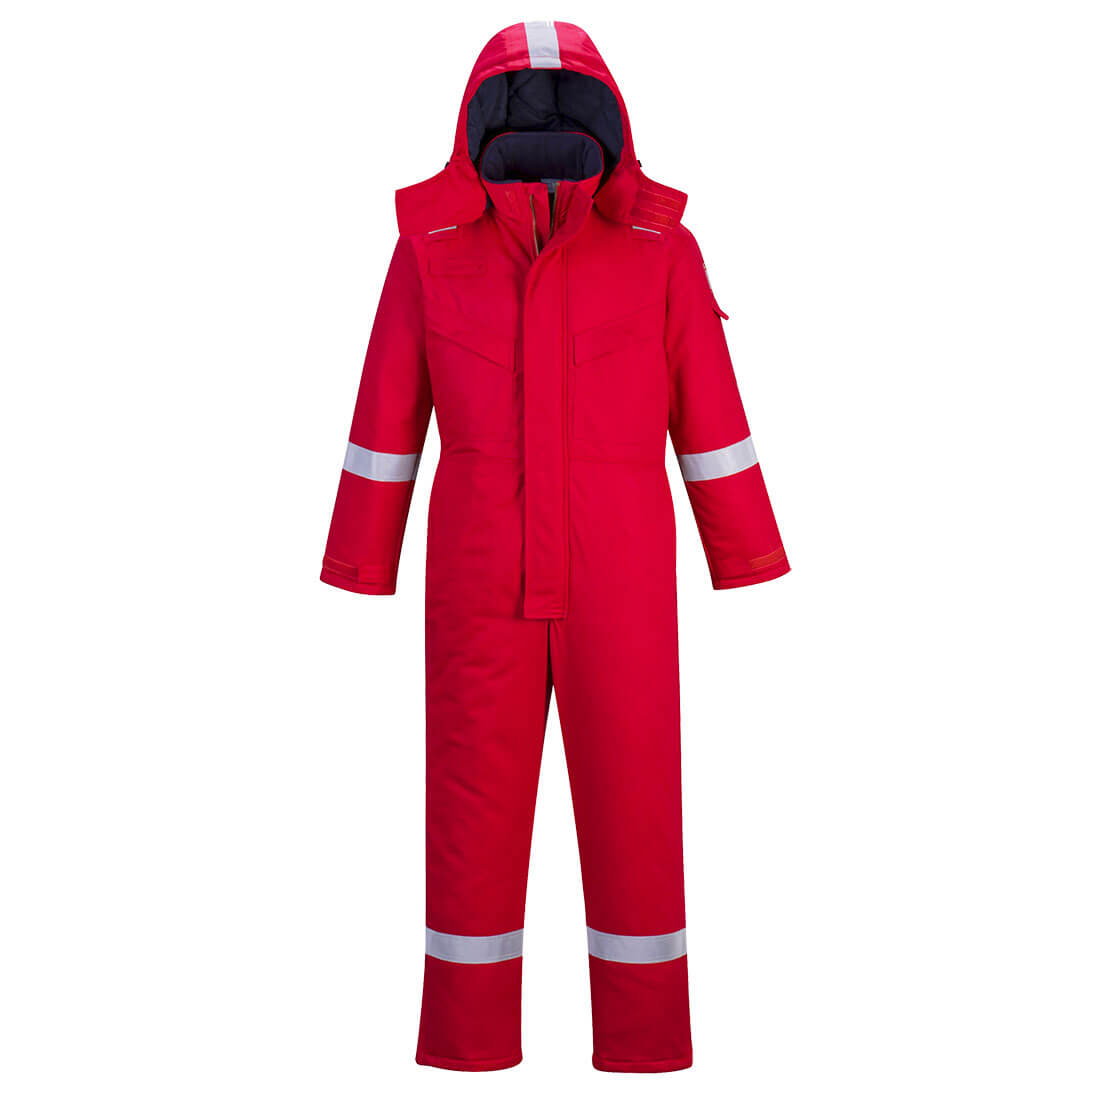 Image of Biz Flame Mens Flame Resistant Antistatic Winter Overall Red S 32"